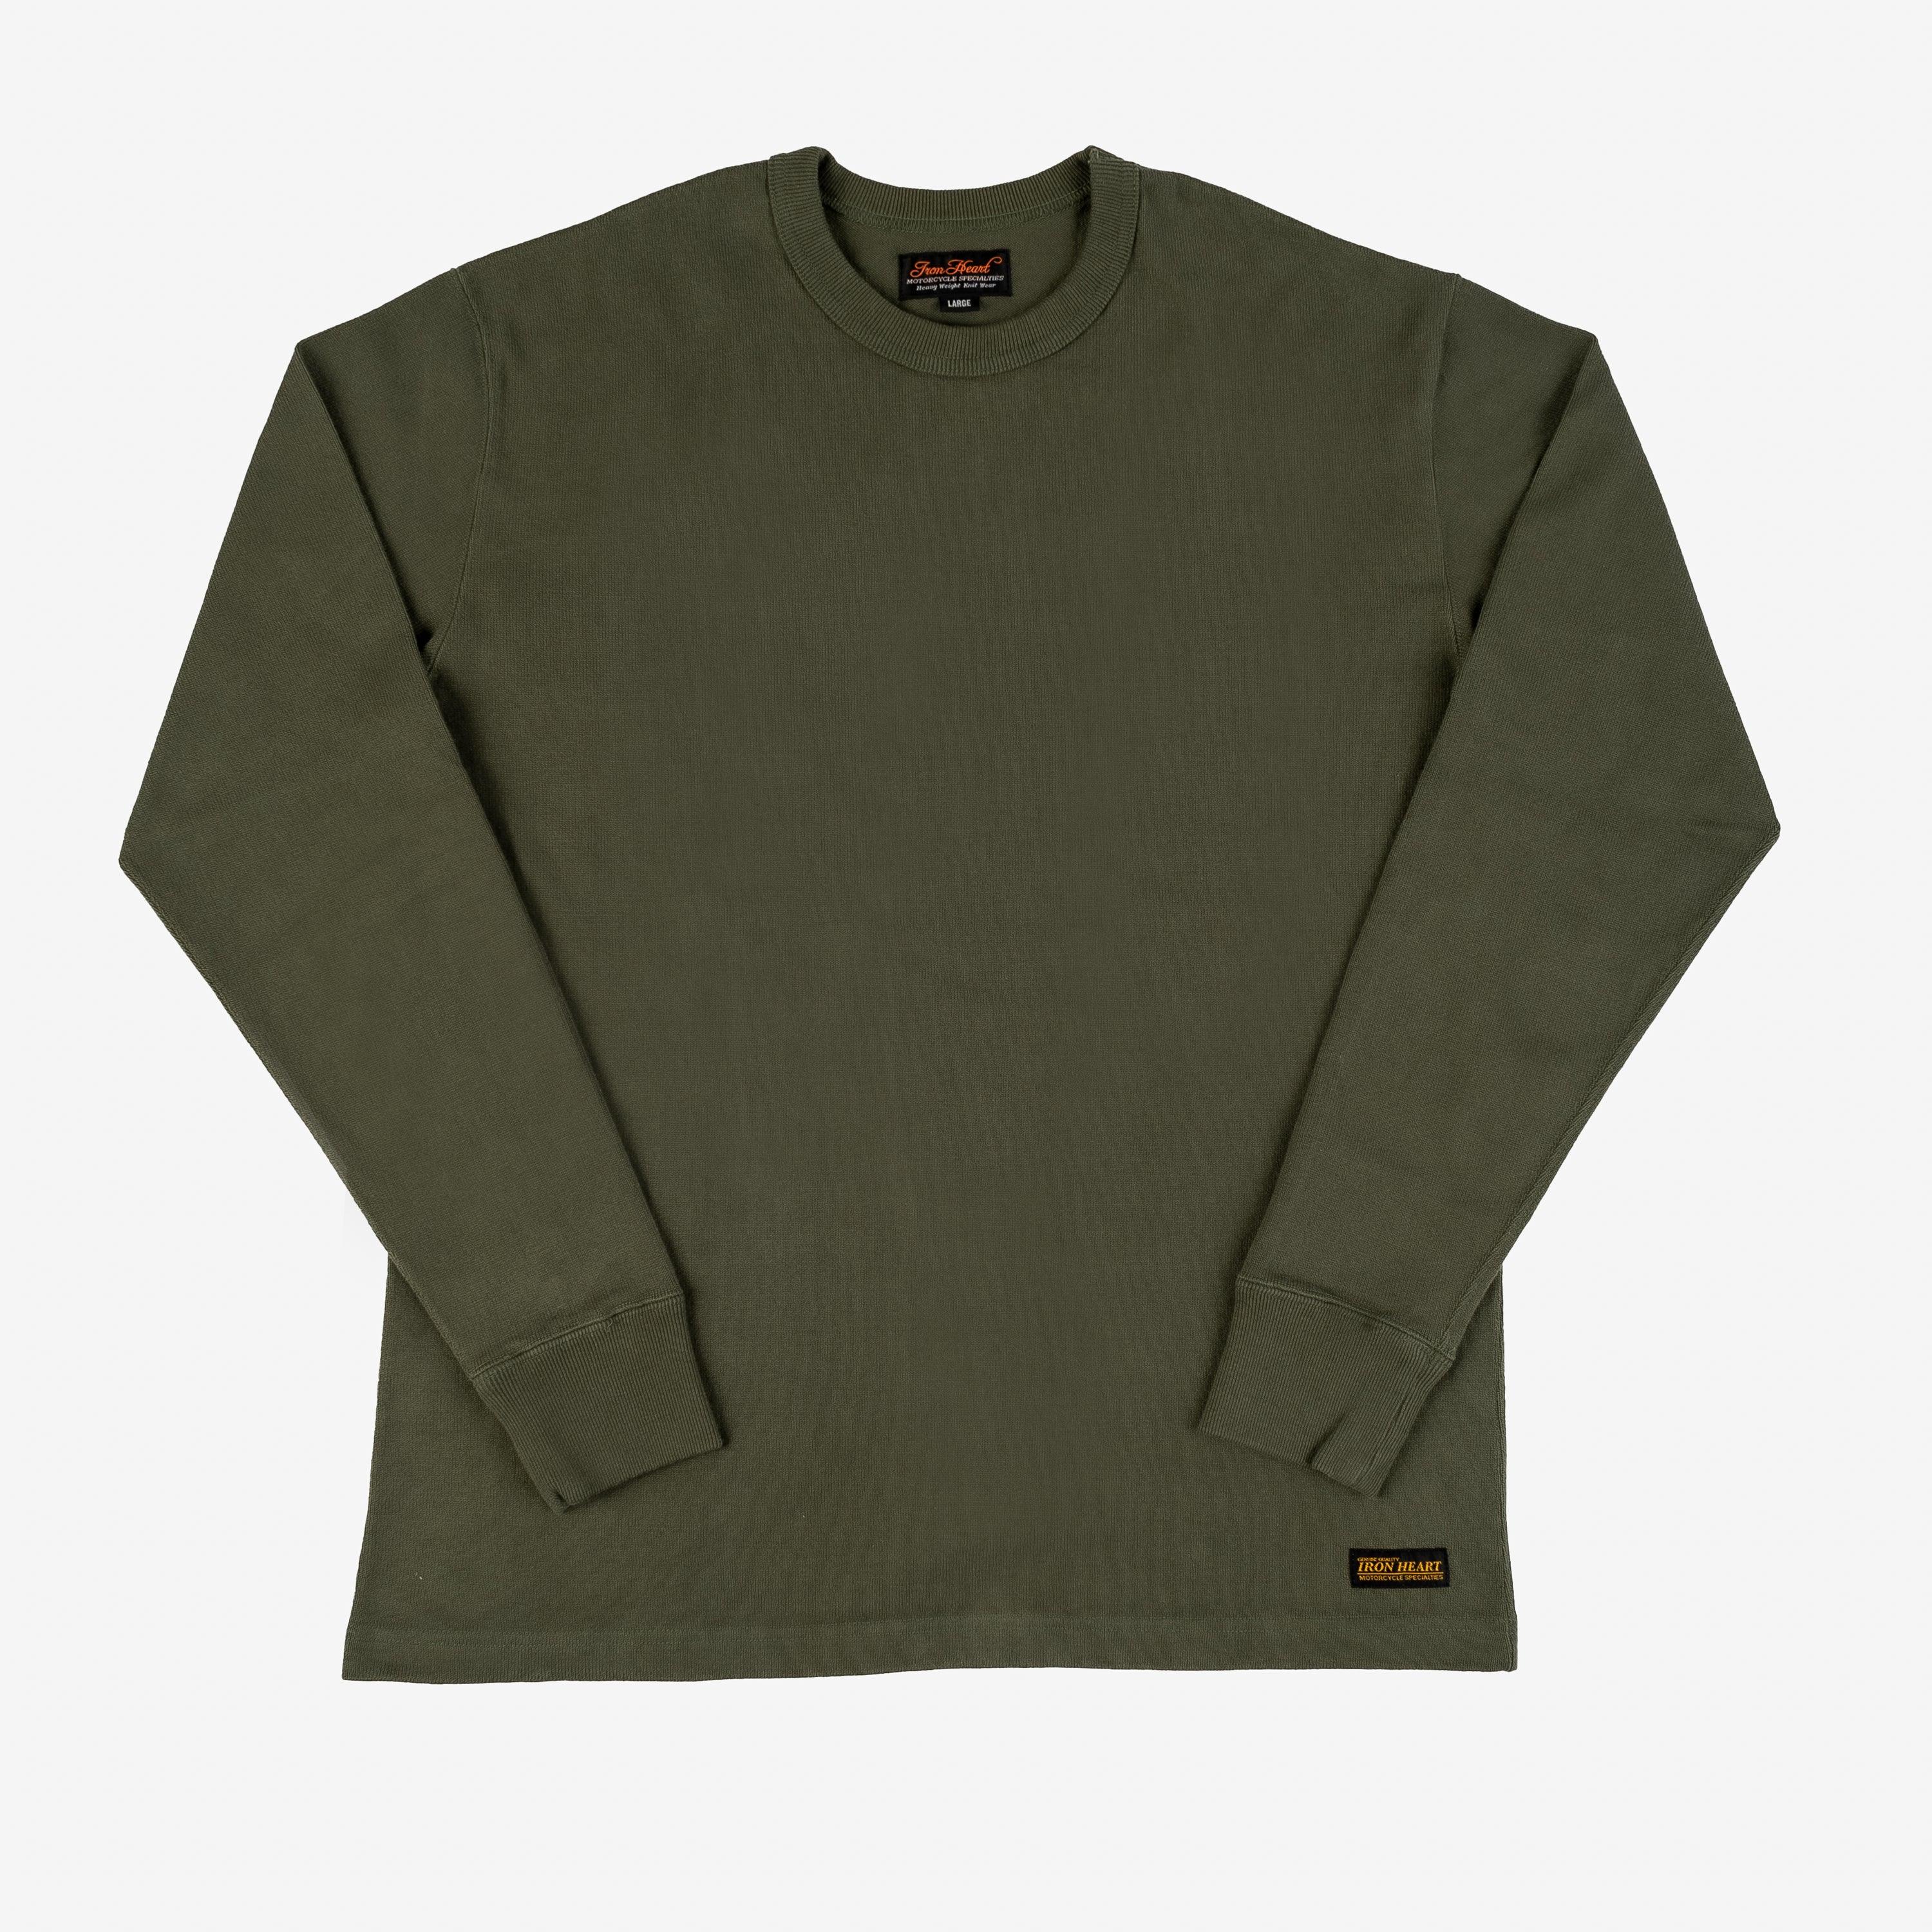 Iron Heart IHTL-1501-OLV 11oz Cotton Knit Long Sleeved Crew Neck Sweater - Olive - Guilty Party